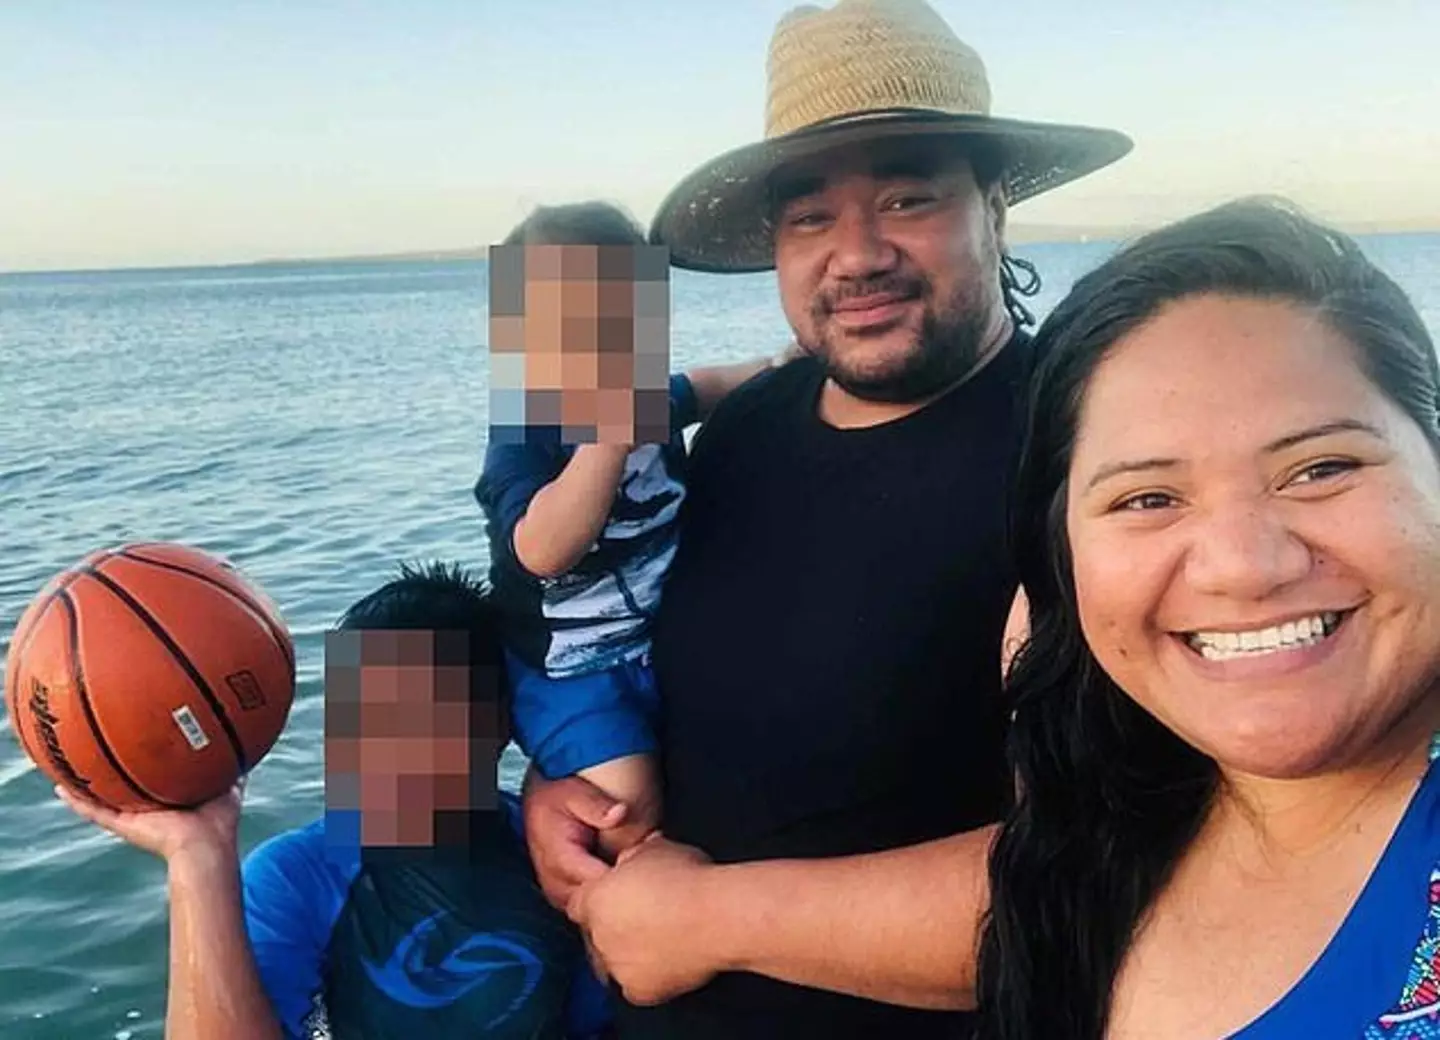 A father from New Zealand was electrocuted to death at work.